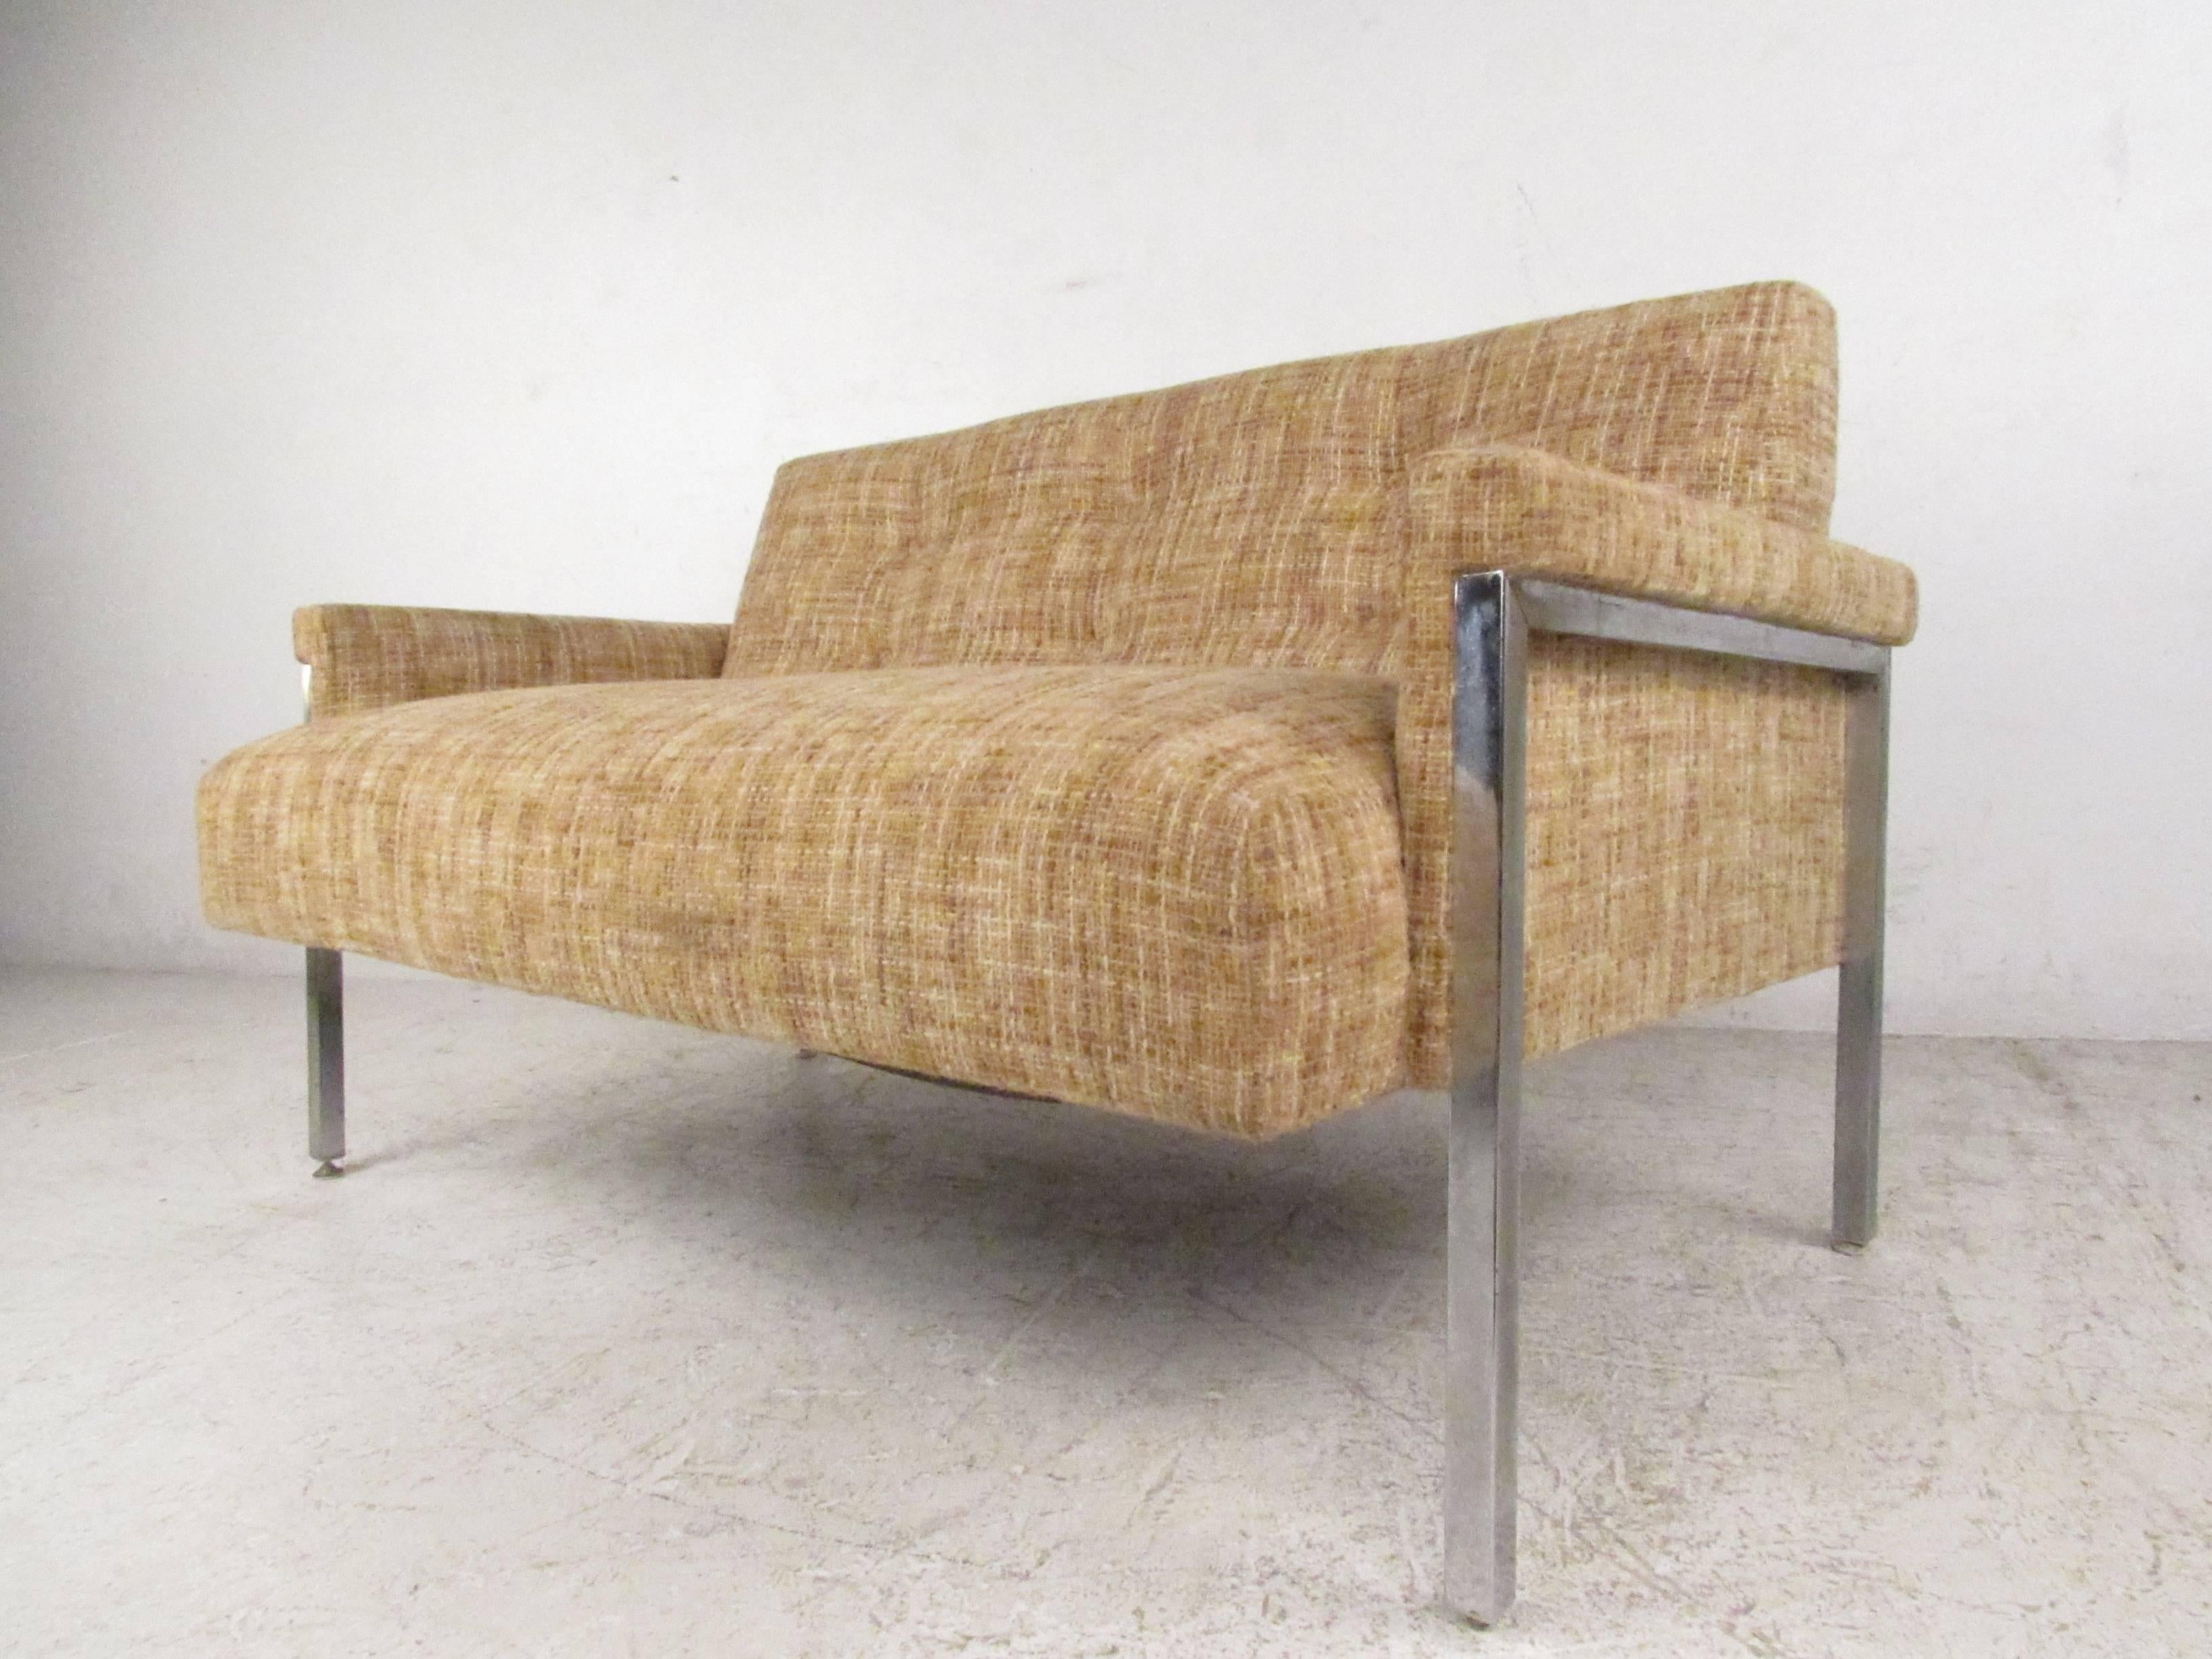 This vintage two-seat sofa or loveseat features comfortable tufted upholstery, chrome Baughman style legs, and a simple yet stylish Mid-Century Modern design. Perfect additional seating for home or office, please confirm item location (NY or NJ).